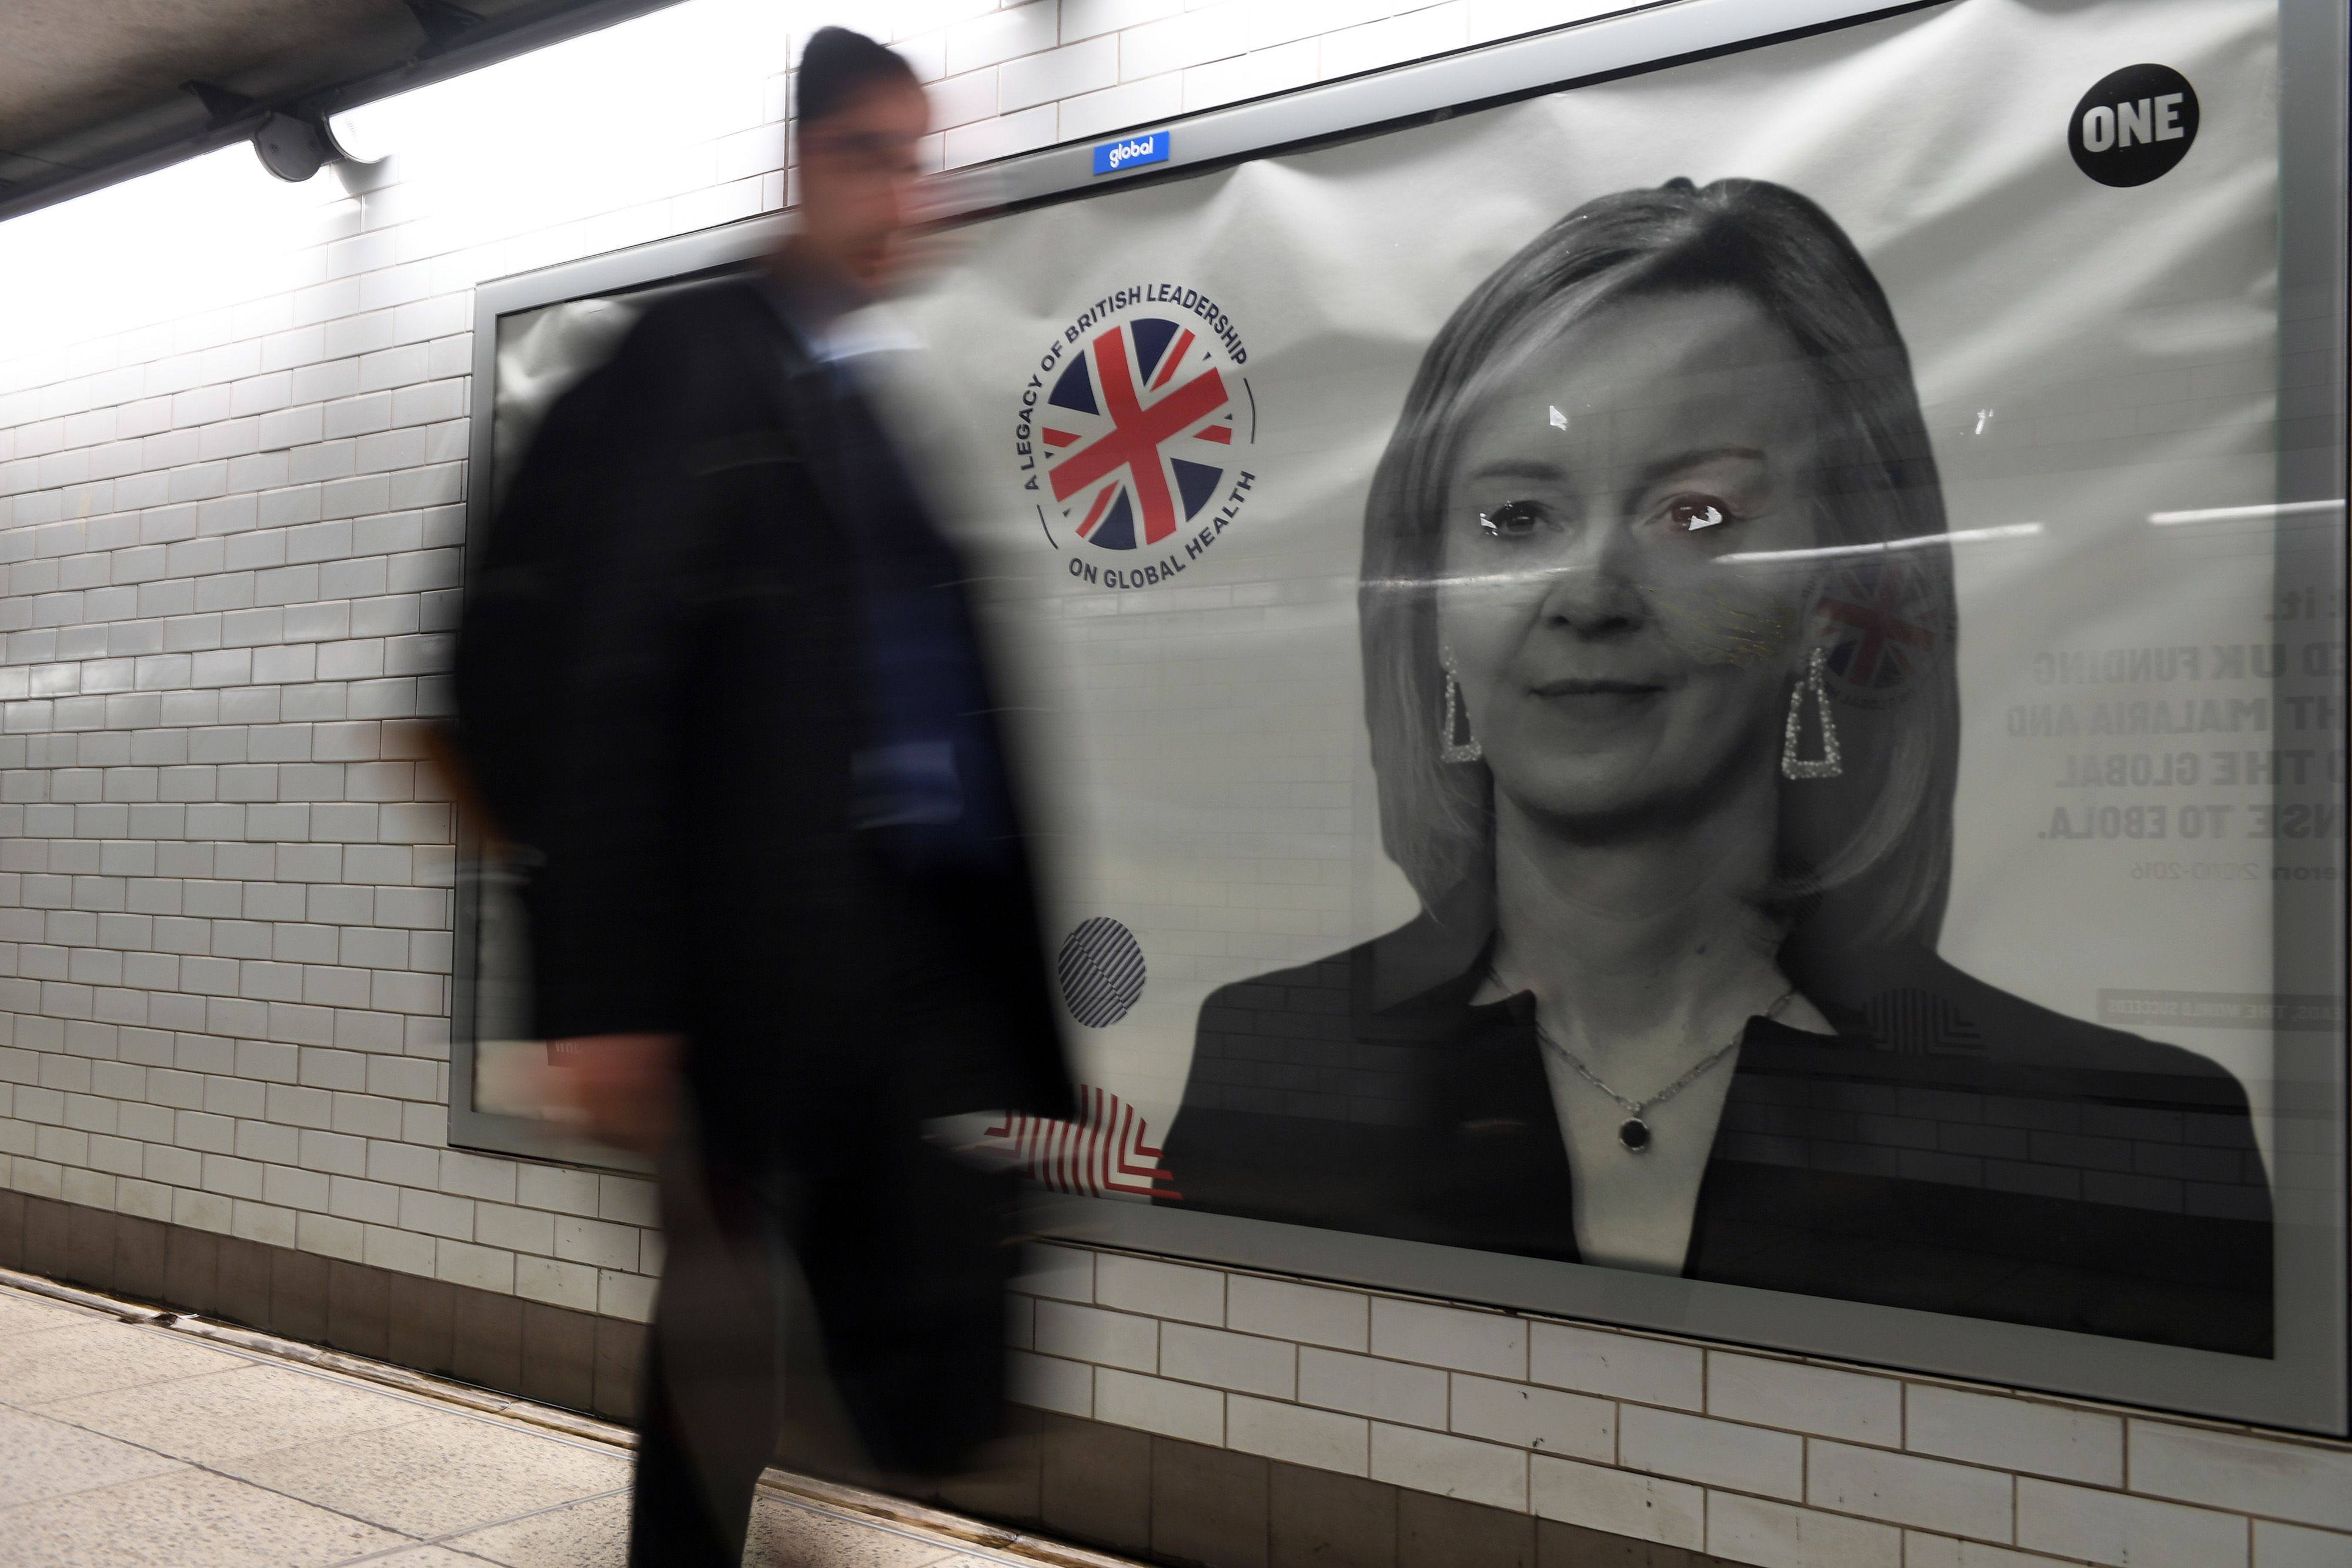 A pedestrian passes a billboard advertisement for Liz Truss, outgoing UK prime minister, on a public walkway in London. Photo: Bloomberg